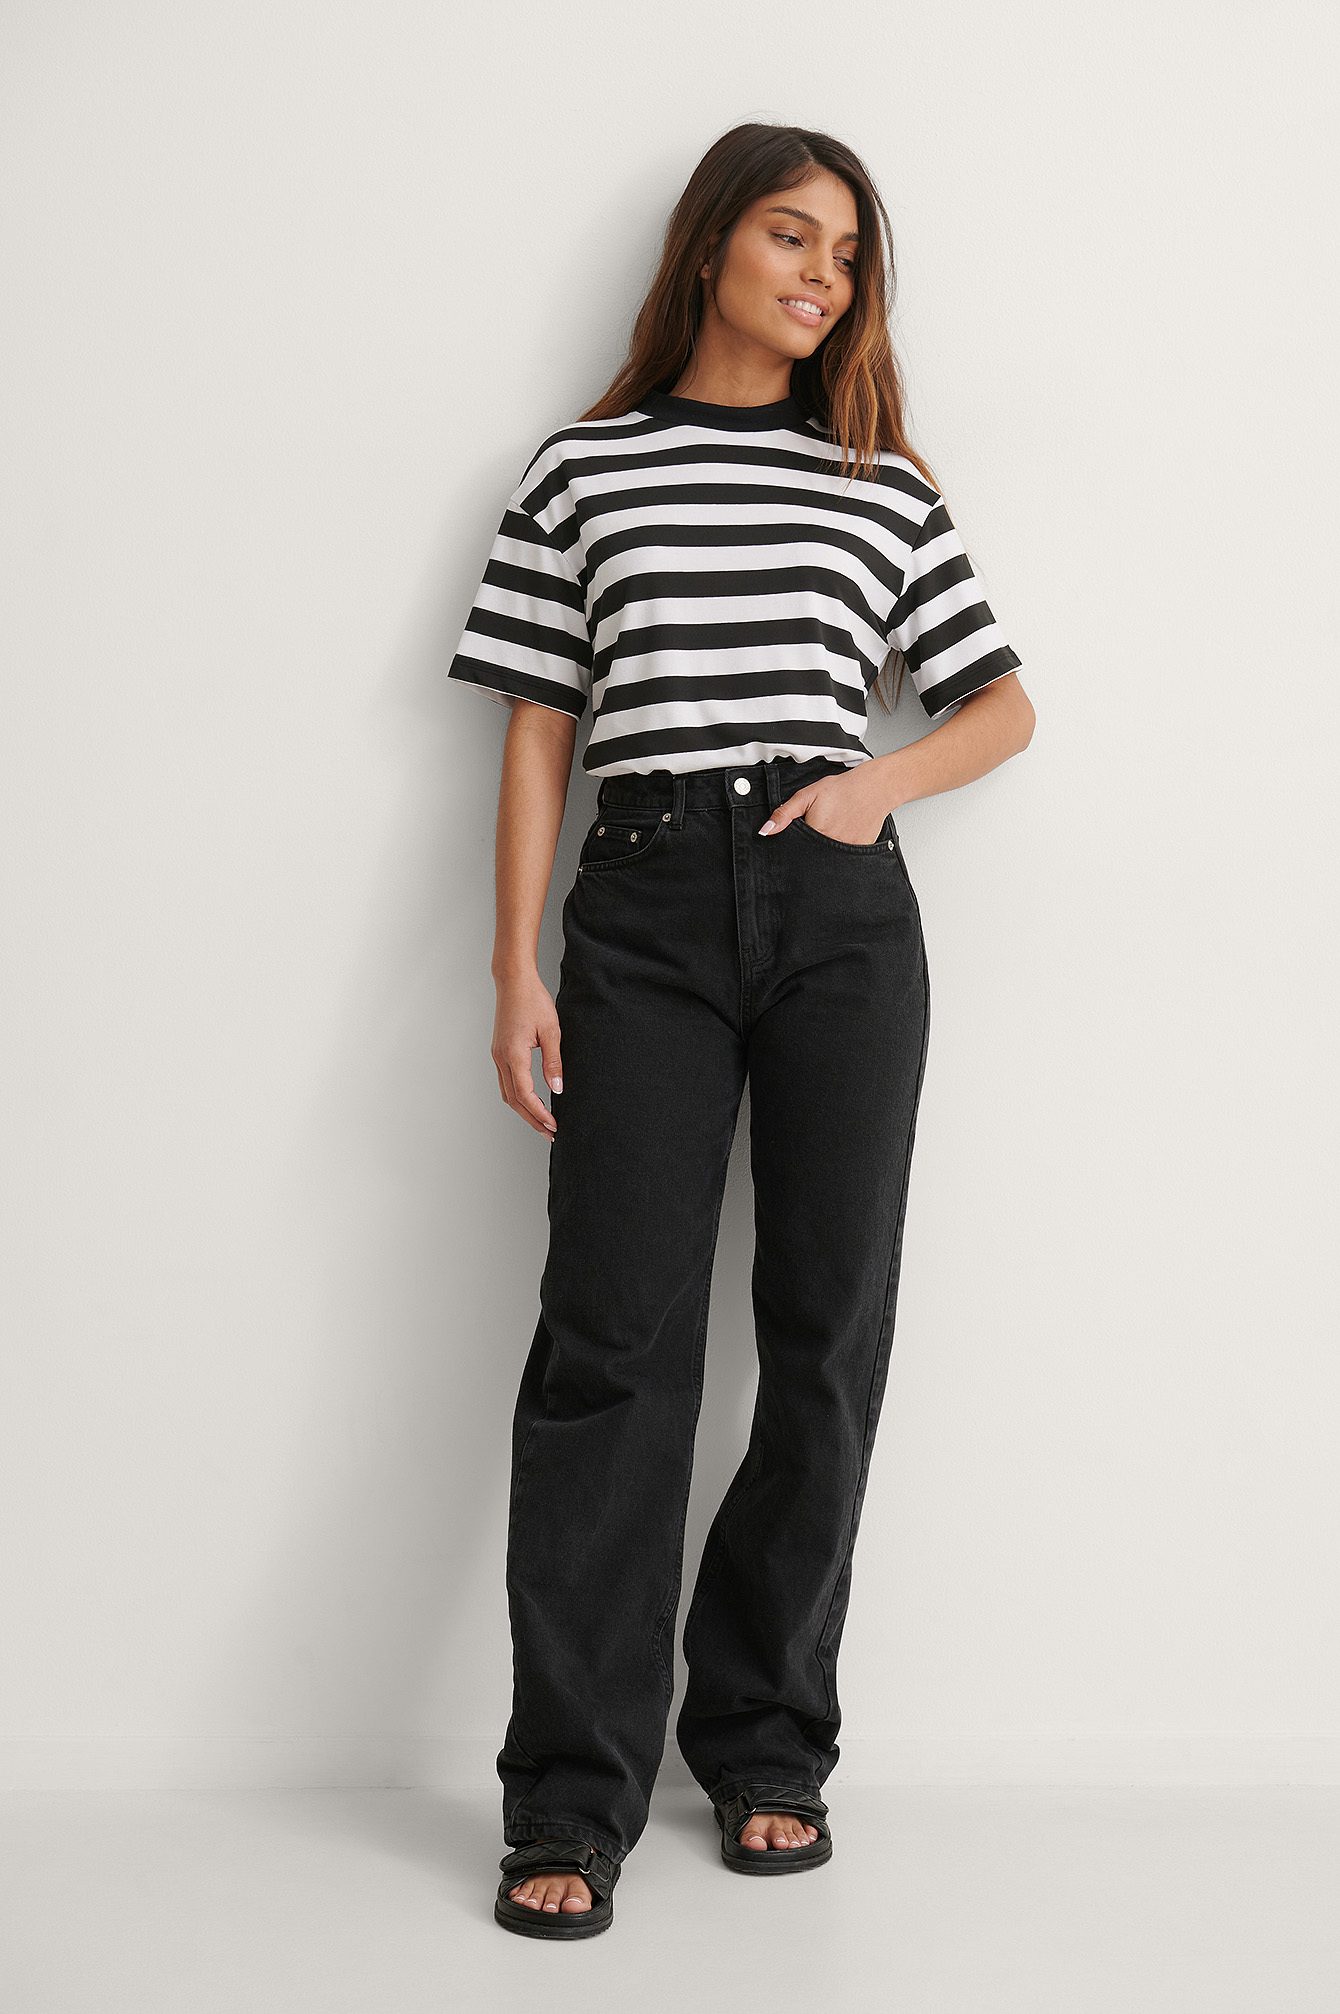 Trendyol Striped Tee Outfit